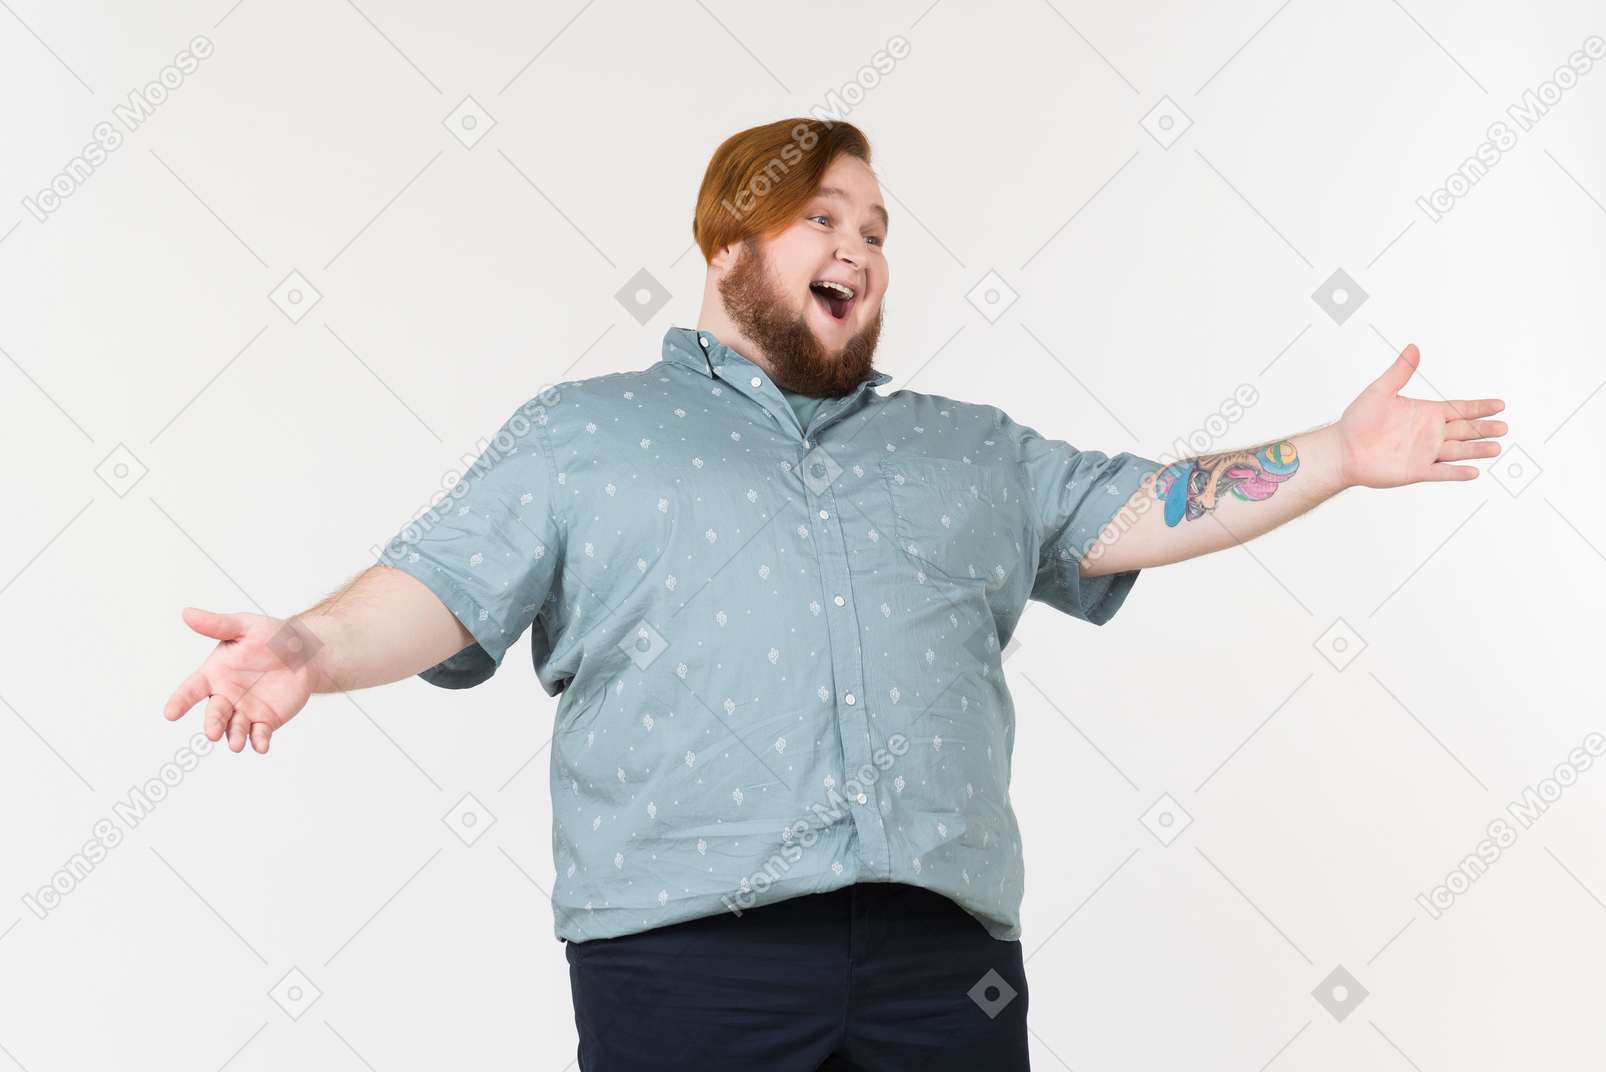 A plump man standing with his hands on his hips and laughing